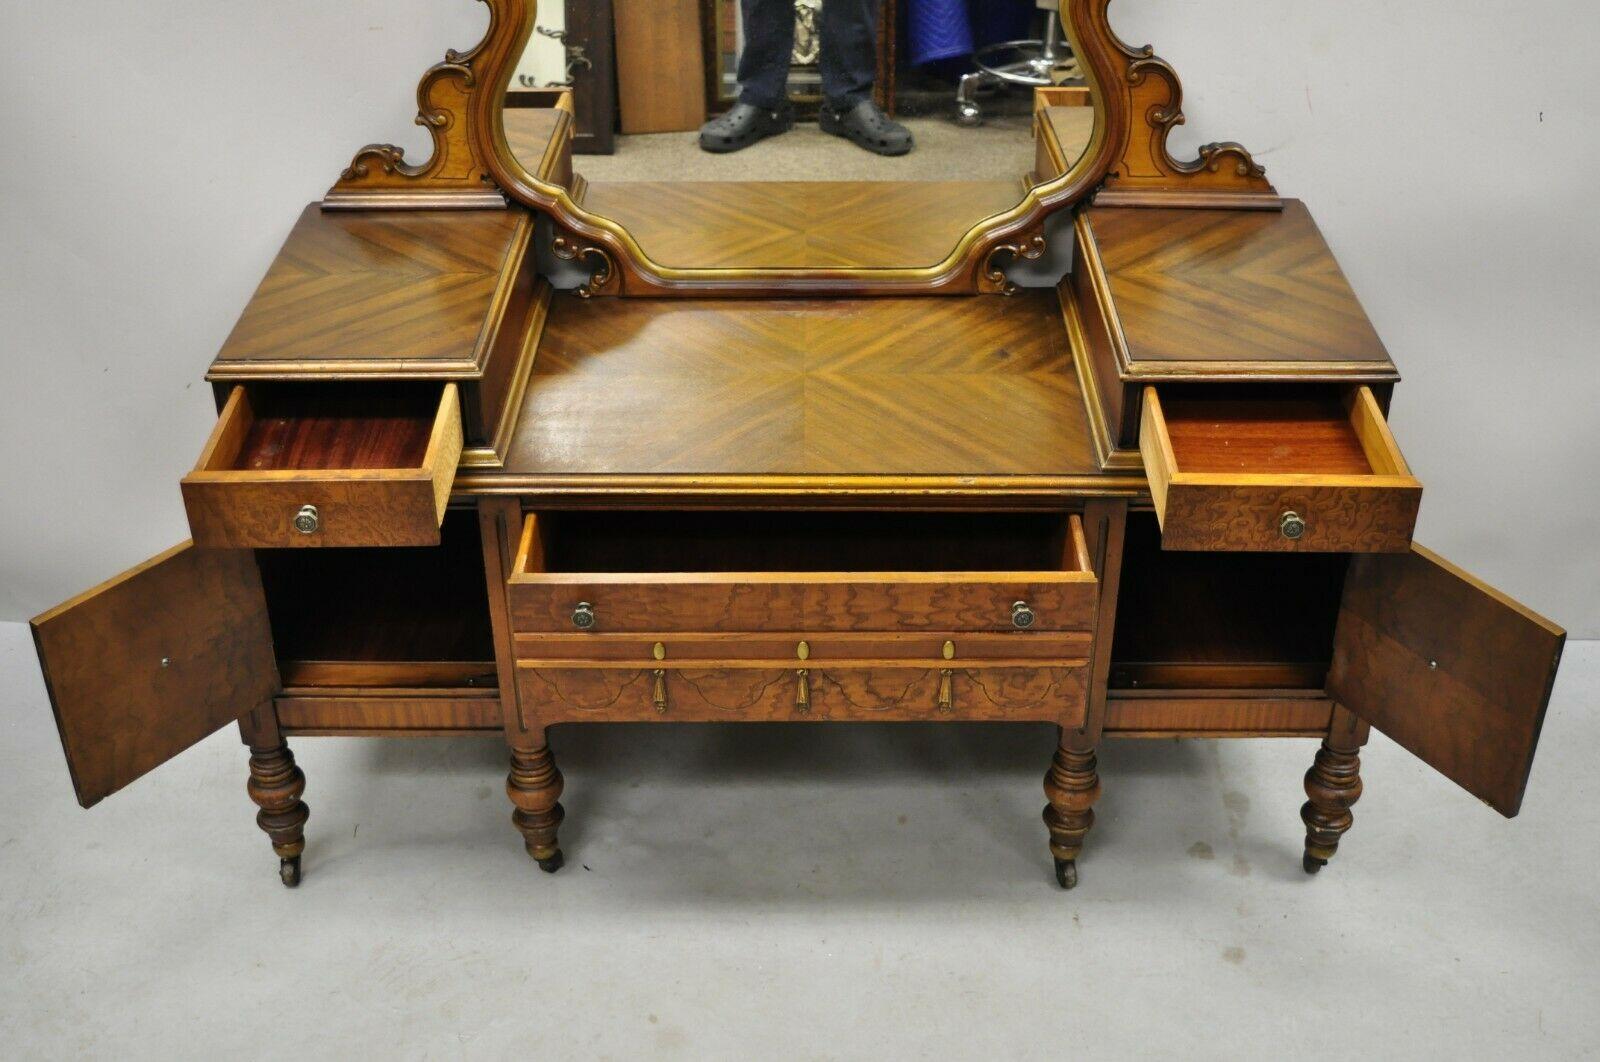 20th Century Antique Jacobean Revival Depression Walnut Vanity Table With Mirror